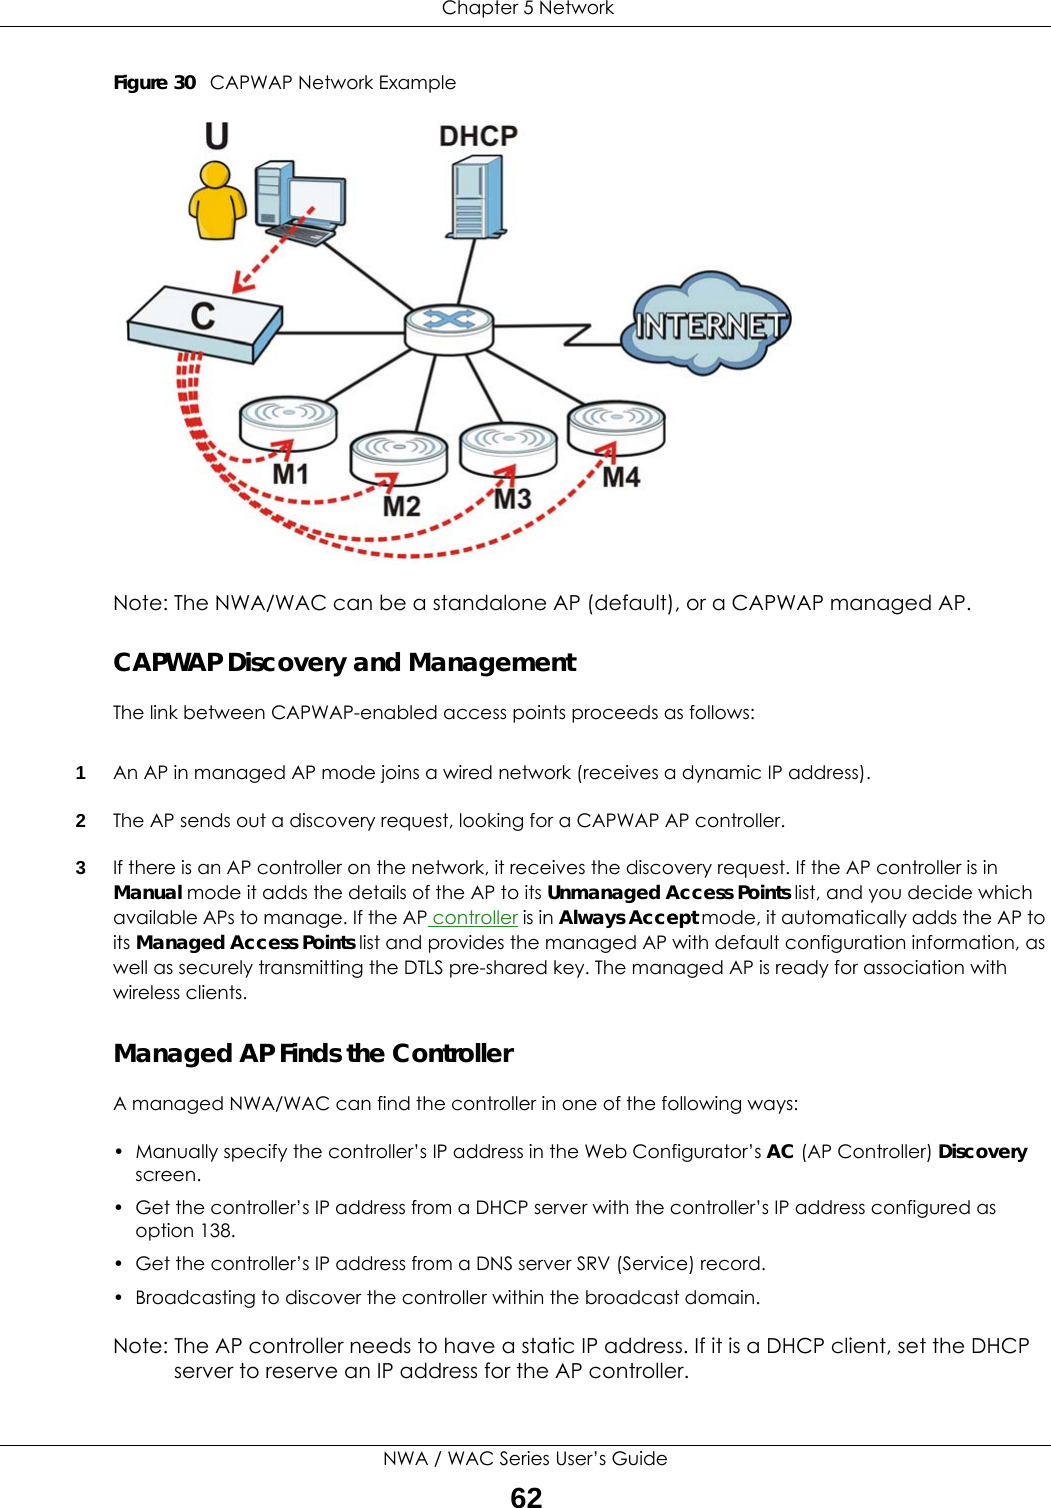  Chapter 5 NetworkNWA / WAC Series User’s Guide62Figure 30   CAPWAP Network ExampleNote: The NWA/WAC can be a standalone AP (default), or a CAPWAP managed AP.CAPWAP Discovery and ManagementThe link between CAPWAP-enabled access points proceeds as follows:1An AP in managed AP mode joins a wired network (receives a dynamic IP address).2The AP sends out a discovery request, looking for a CAPWAP AP controller.3If there is an AP controller on the network, it receives the discovery request. If the AP controller is in Manual mode it adds the details of the AP to its Unmanaged Access Points list, and you decide which available APs to manage. If the AP controller is in Always Accept mode, it automatically adds the AP to its Managed Access Points list and provides the managed AP with default configuration information, as well as securely transmitting the DTLS pre-shared key. The managed AP is ready for association with wireless clients.Managed AP Finds the ControllerA managed NWA/WAC can find the controller in one of the following ways:• Manually specify the controller’s IP address in the Web Configurator’s AC (AP Controller) Discovery screen. • Get the controller’s IP address from a DHCP server with the controller’s IP address configured as option 138.• Get the controller’s IP address from a DNS server SRV (Service) record.• Broadcasting to discover the controller within the broadcast domain.Note: The AP controller needs to have a static IP address. If it is a DHCP client, set the DHCP server to reserve an IP address for the AP controller.